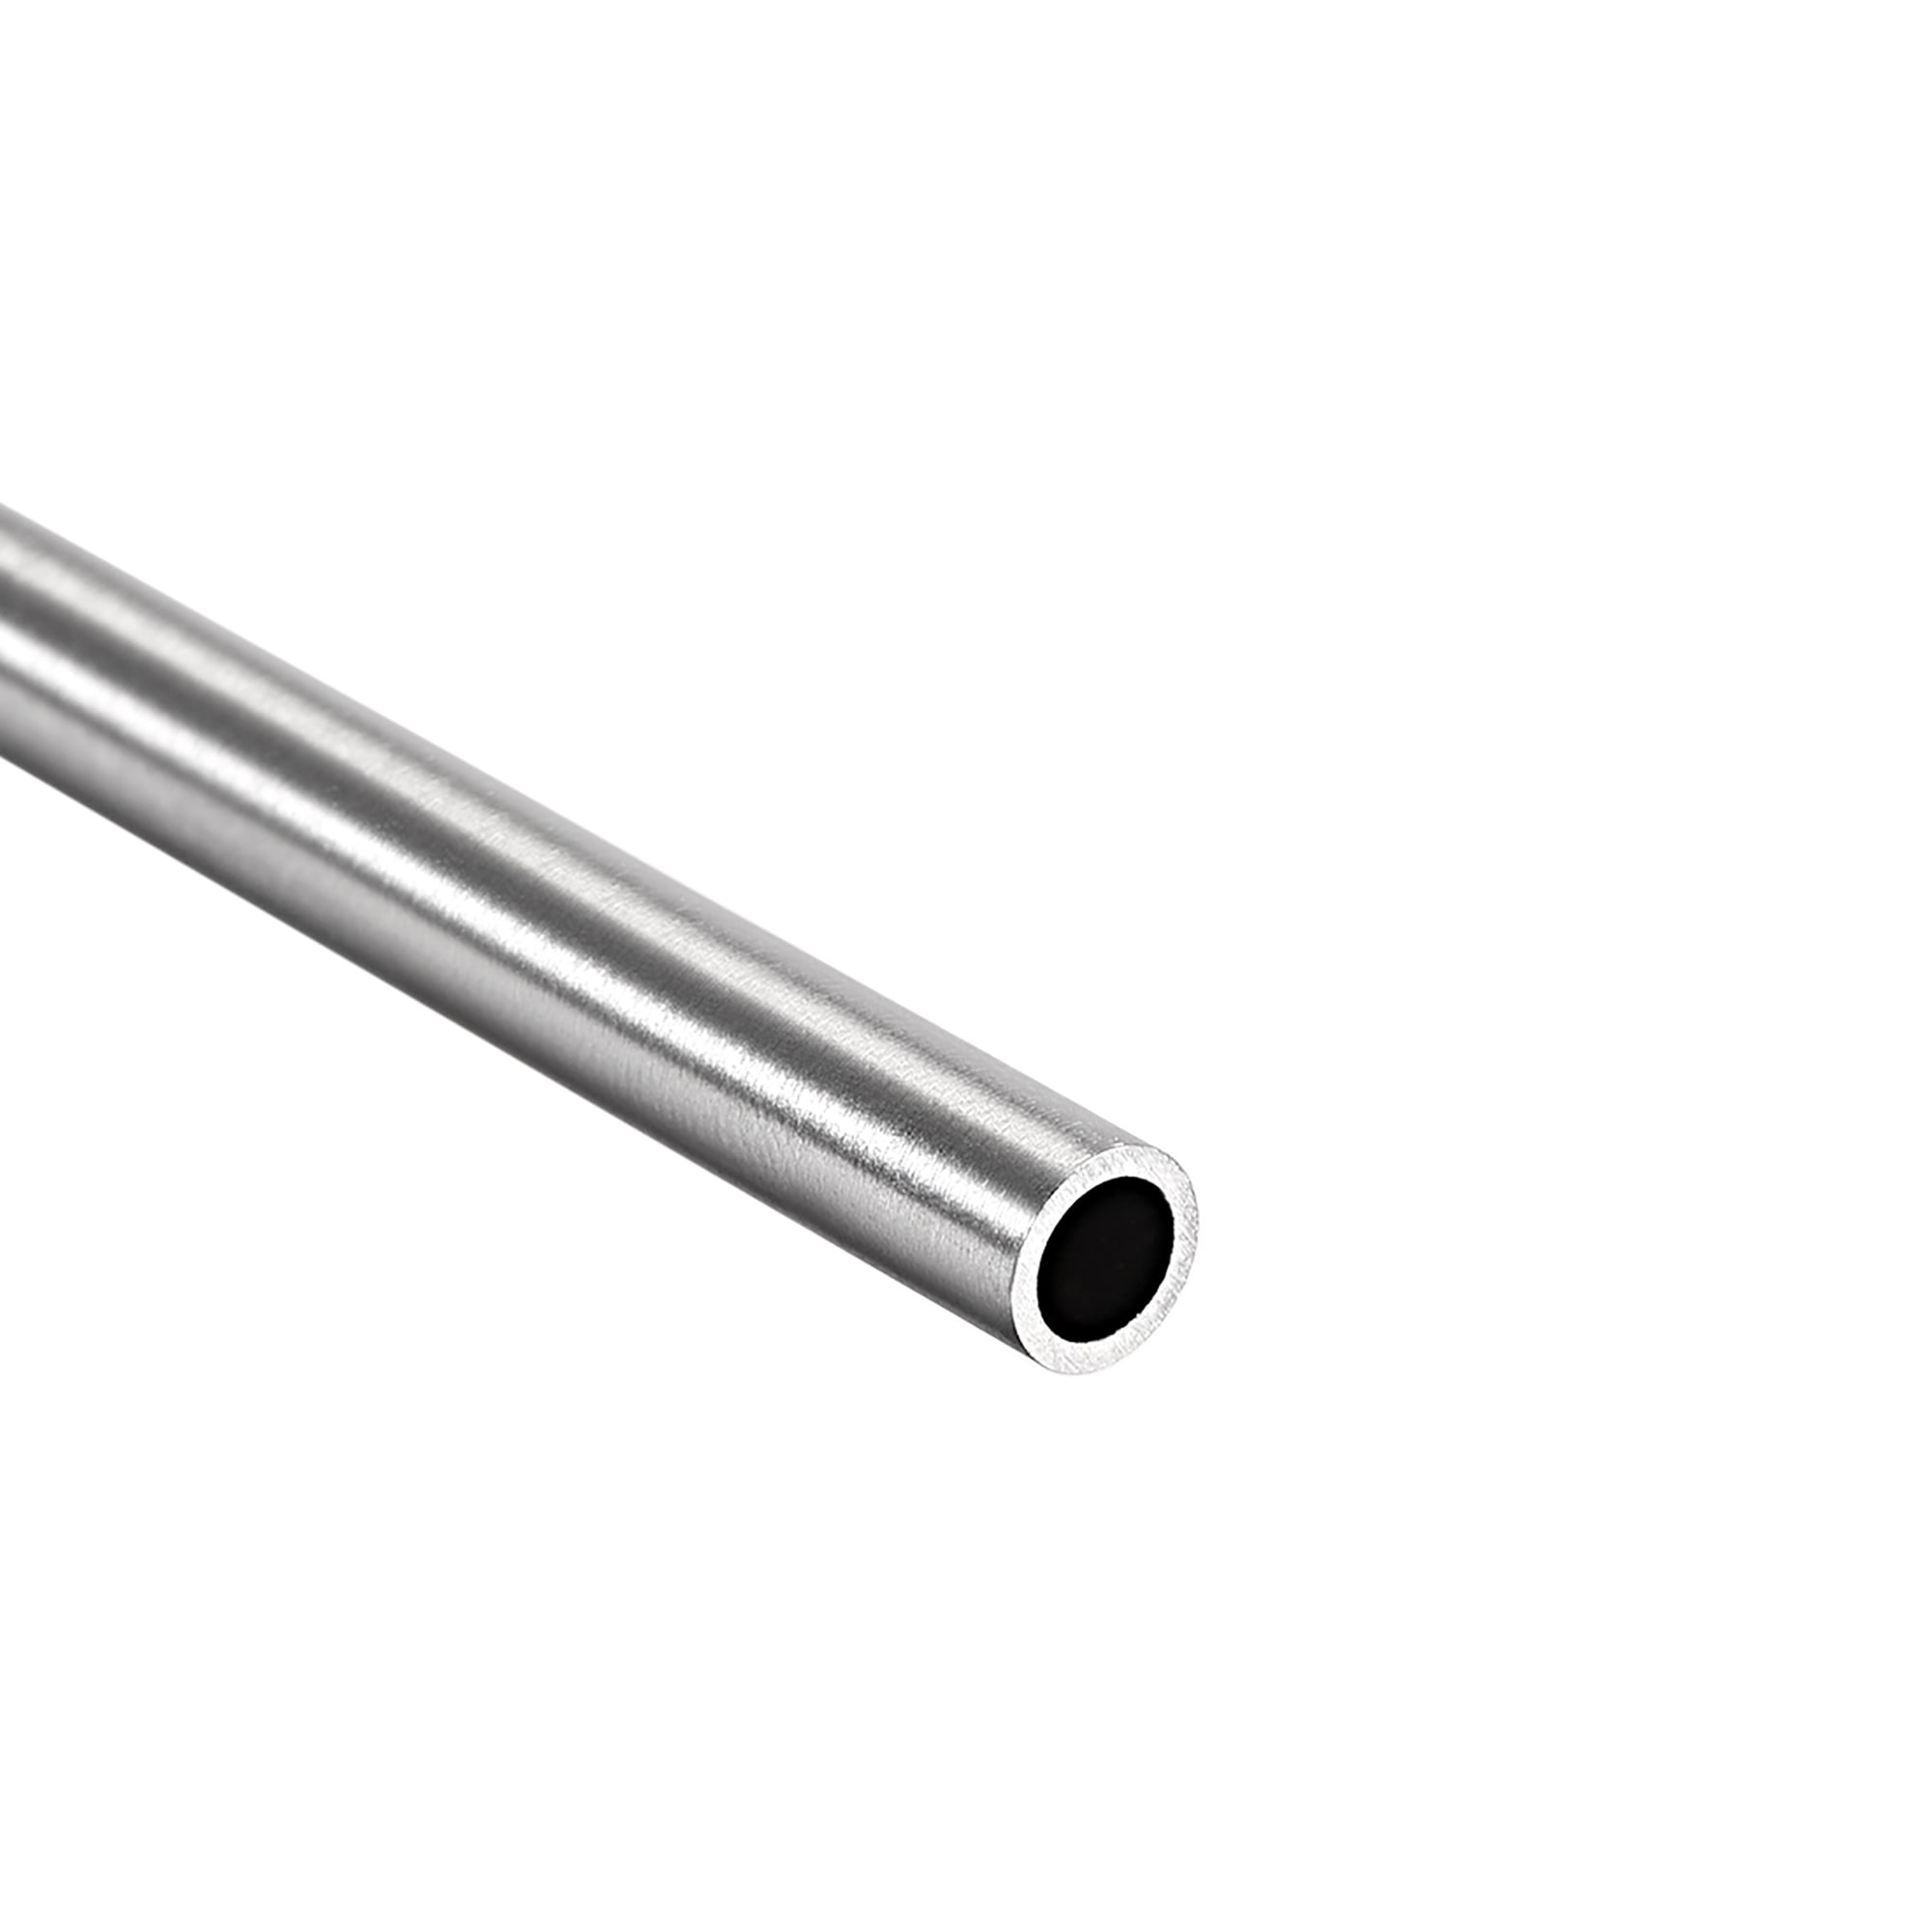 Round Stainless Steel Tube 304 6 mm OD 0.4 mm Wall Thickness 250 mm Length Seamless Straight Pipe Tube 